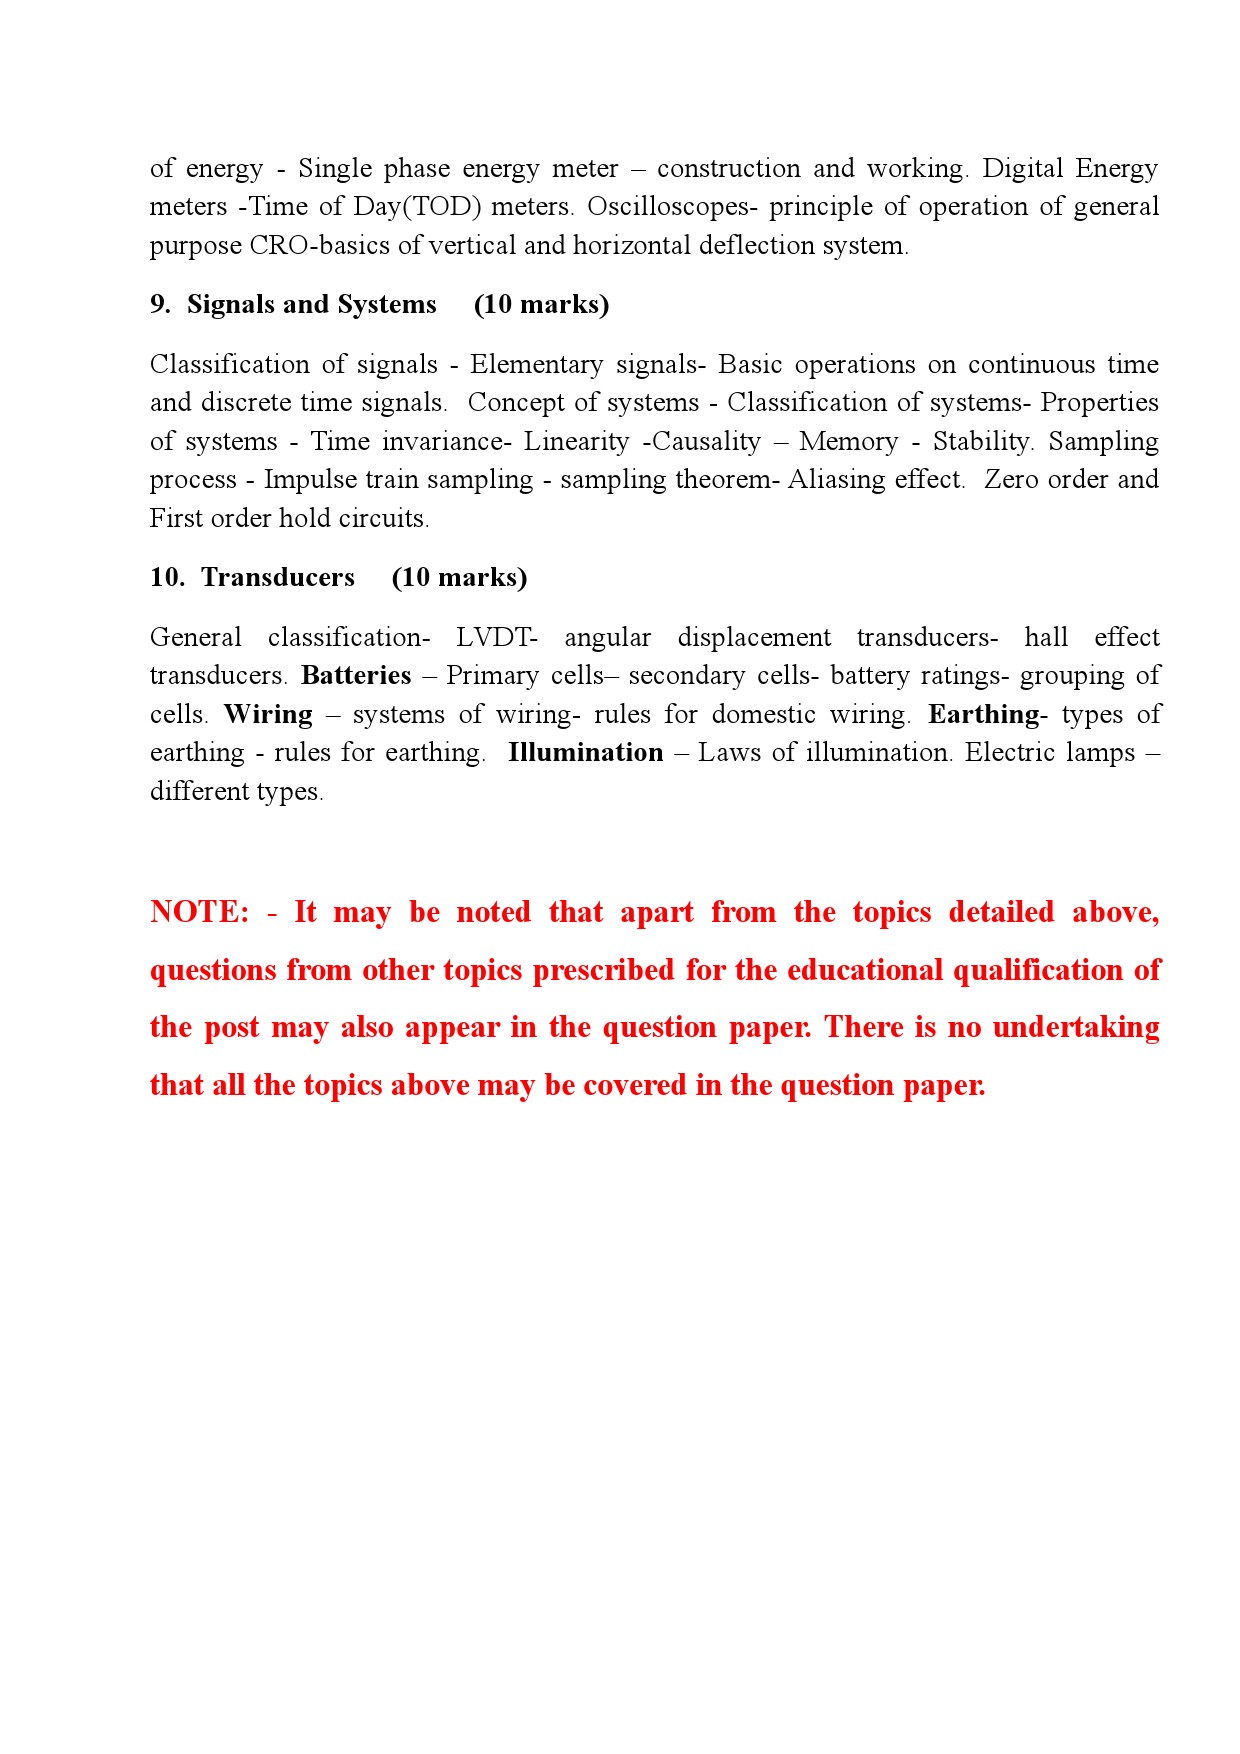 KPSC SYLLABUS OR THE POST OF ASSISTANT MANAGER ELECTRICAL - Notification Image 3